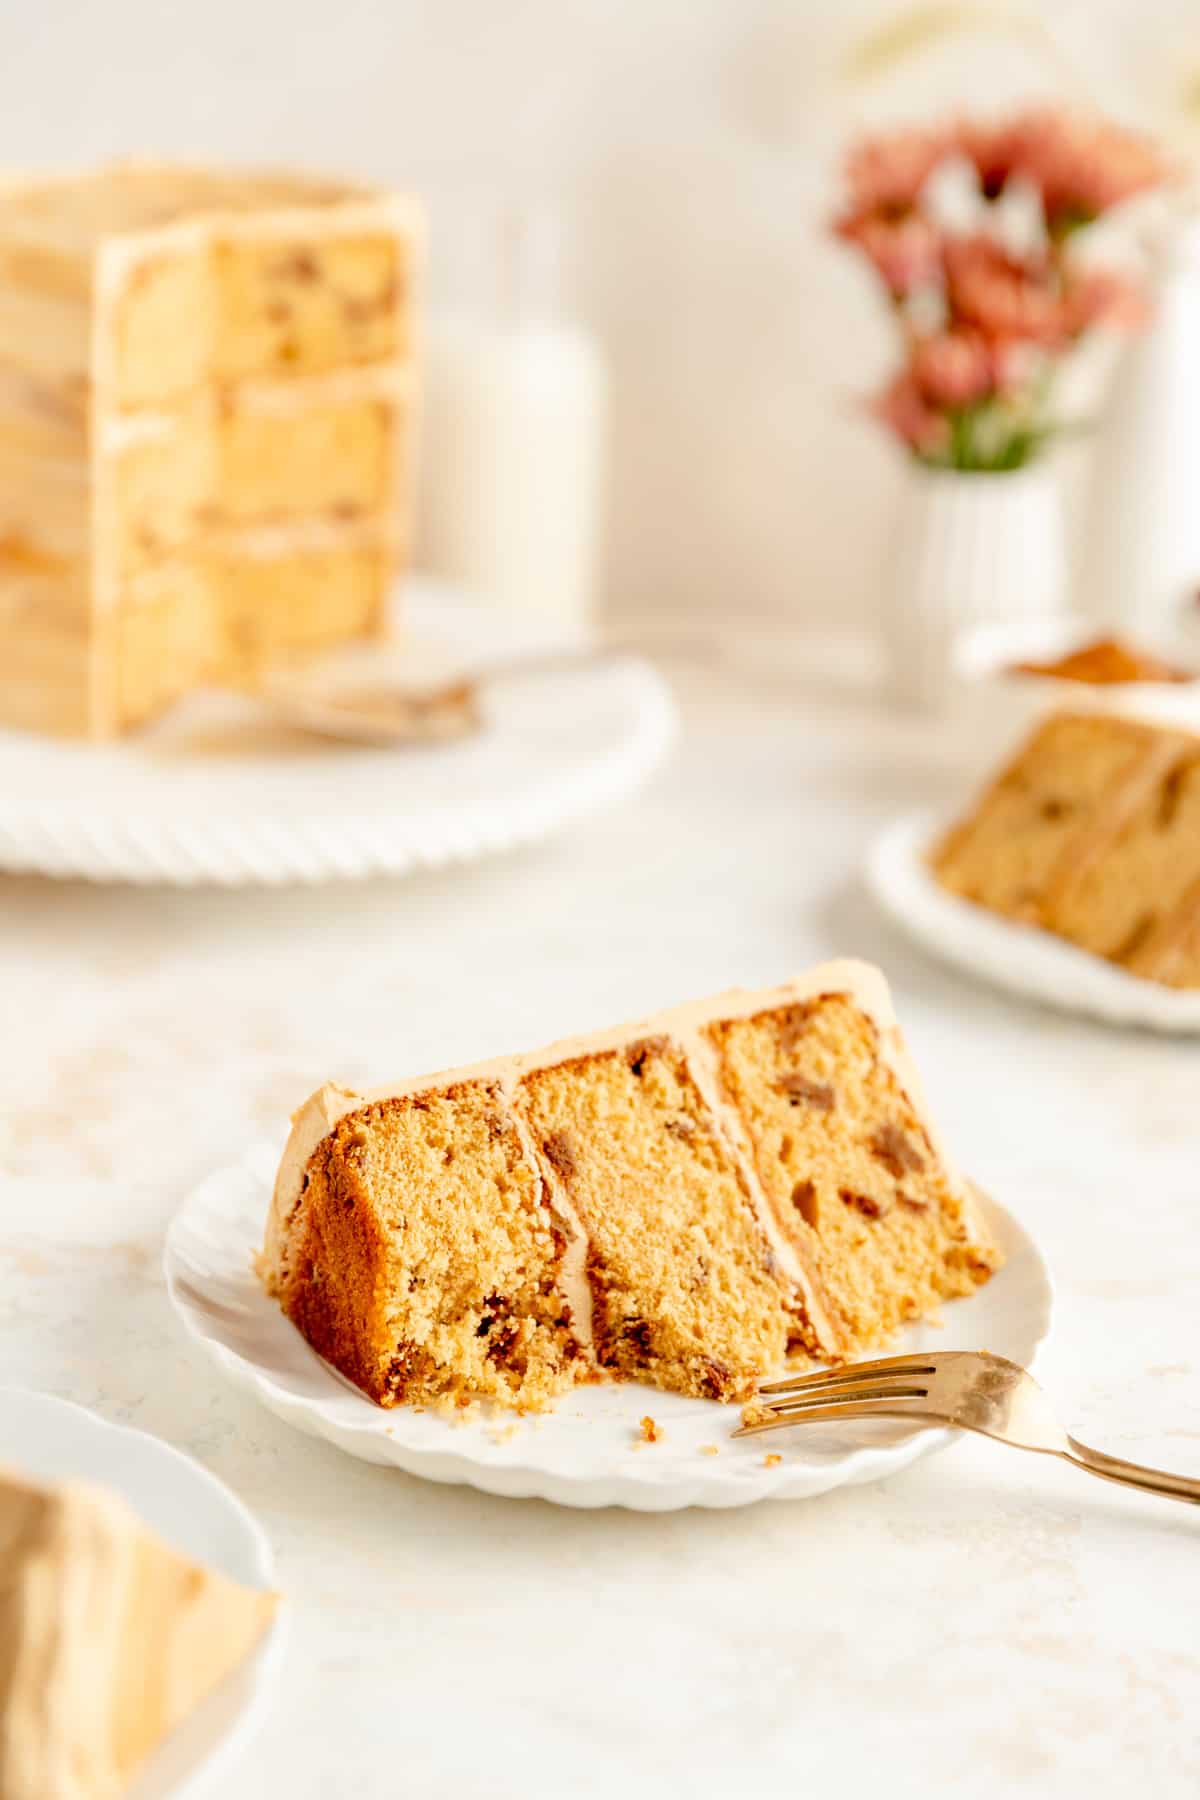 Plated biscoff cake slice with a bite out and gold fork with whole cake in background.